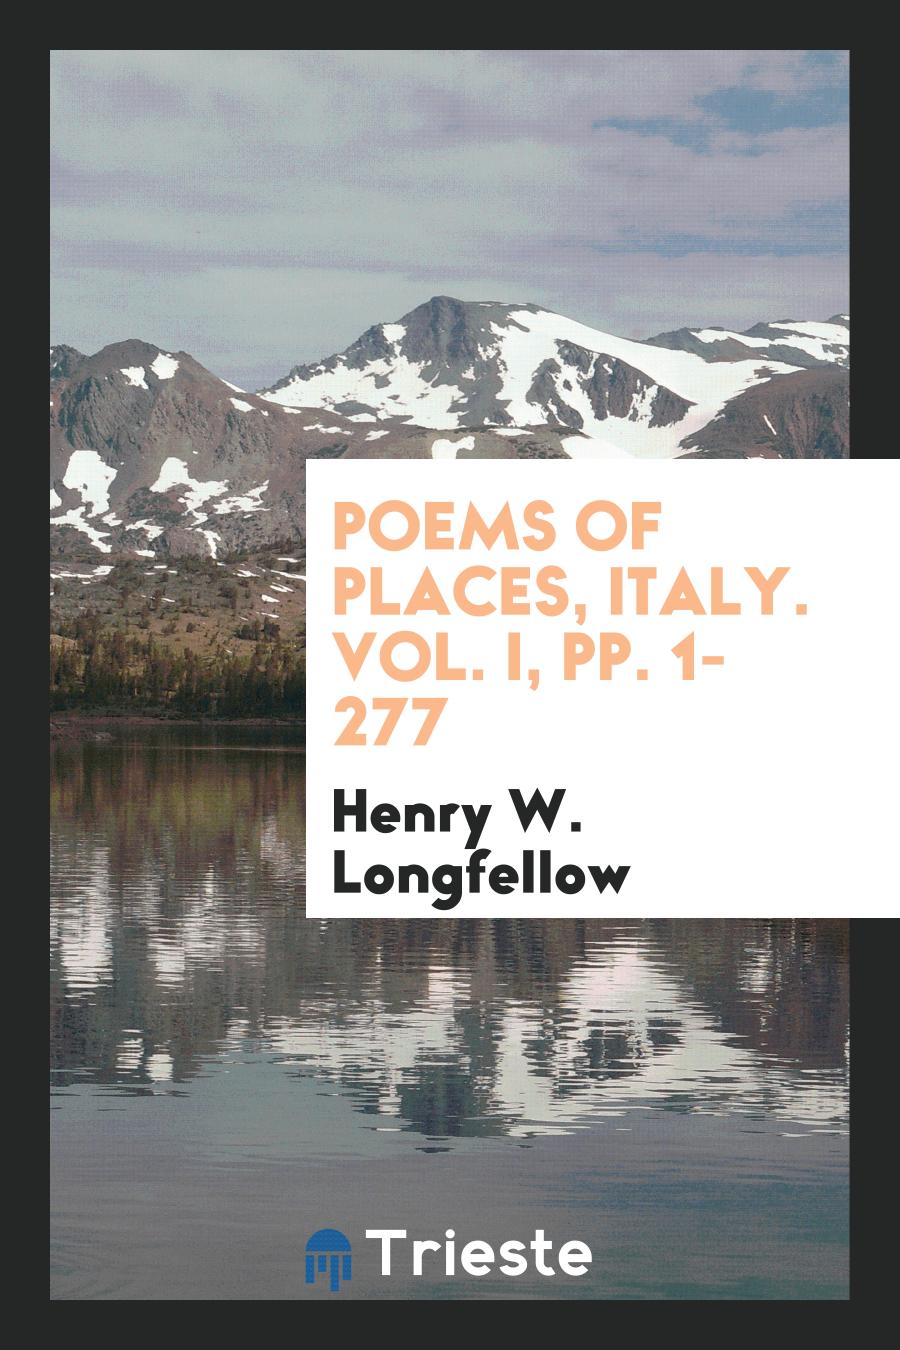 Poems of Places, Italy. Vol. I, pp. 1-277